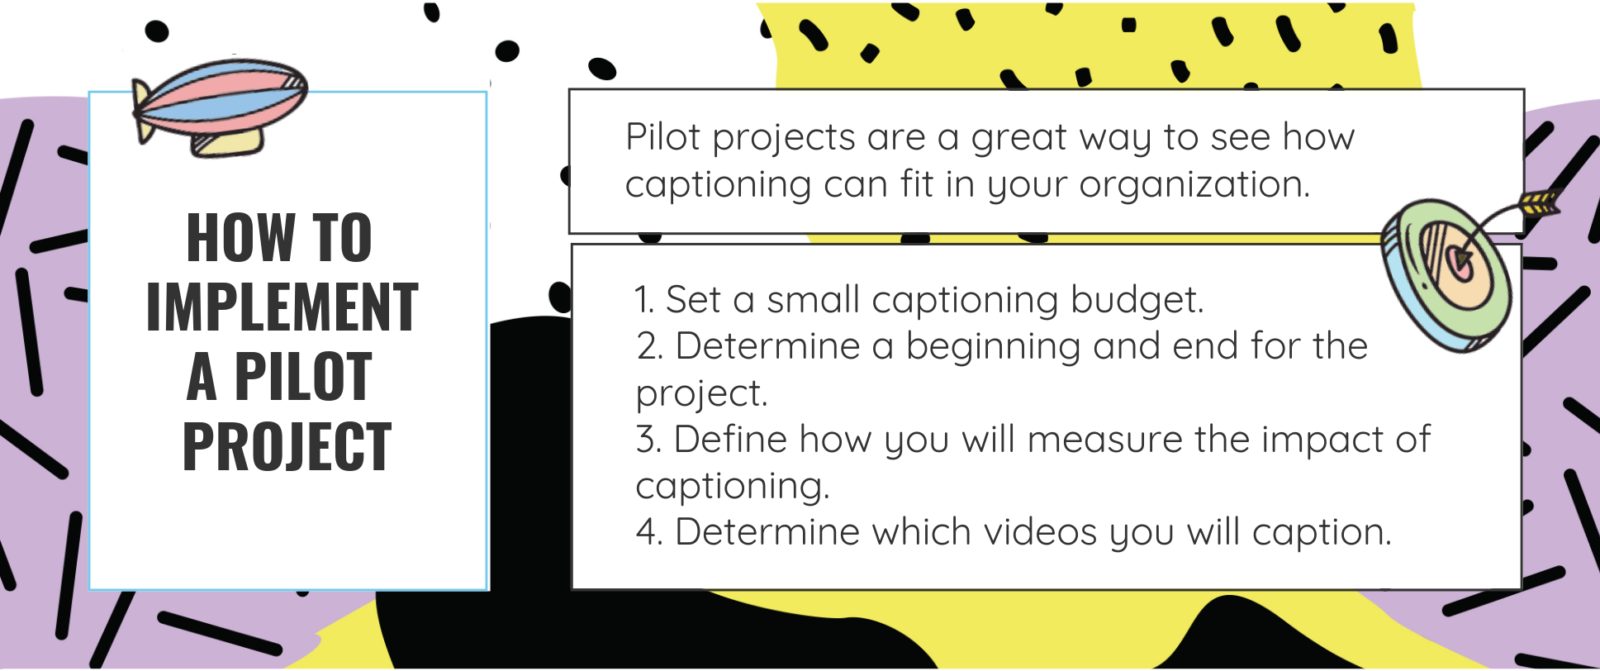 how to set up a pilot project. Pilot projects are a great way to see how captioning can fit in your organization. 1. Set a small captioning budget. 2. Determine a beginning and end for the project. 3. Define how you will measure the impact of captioning.  4. Determine which videos you will caption.